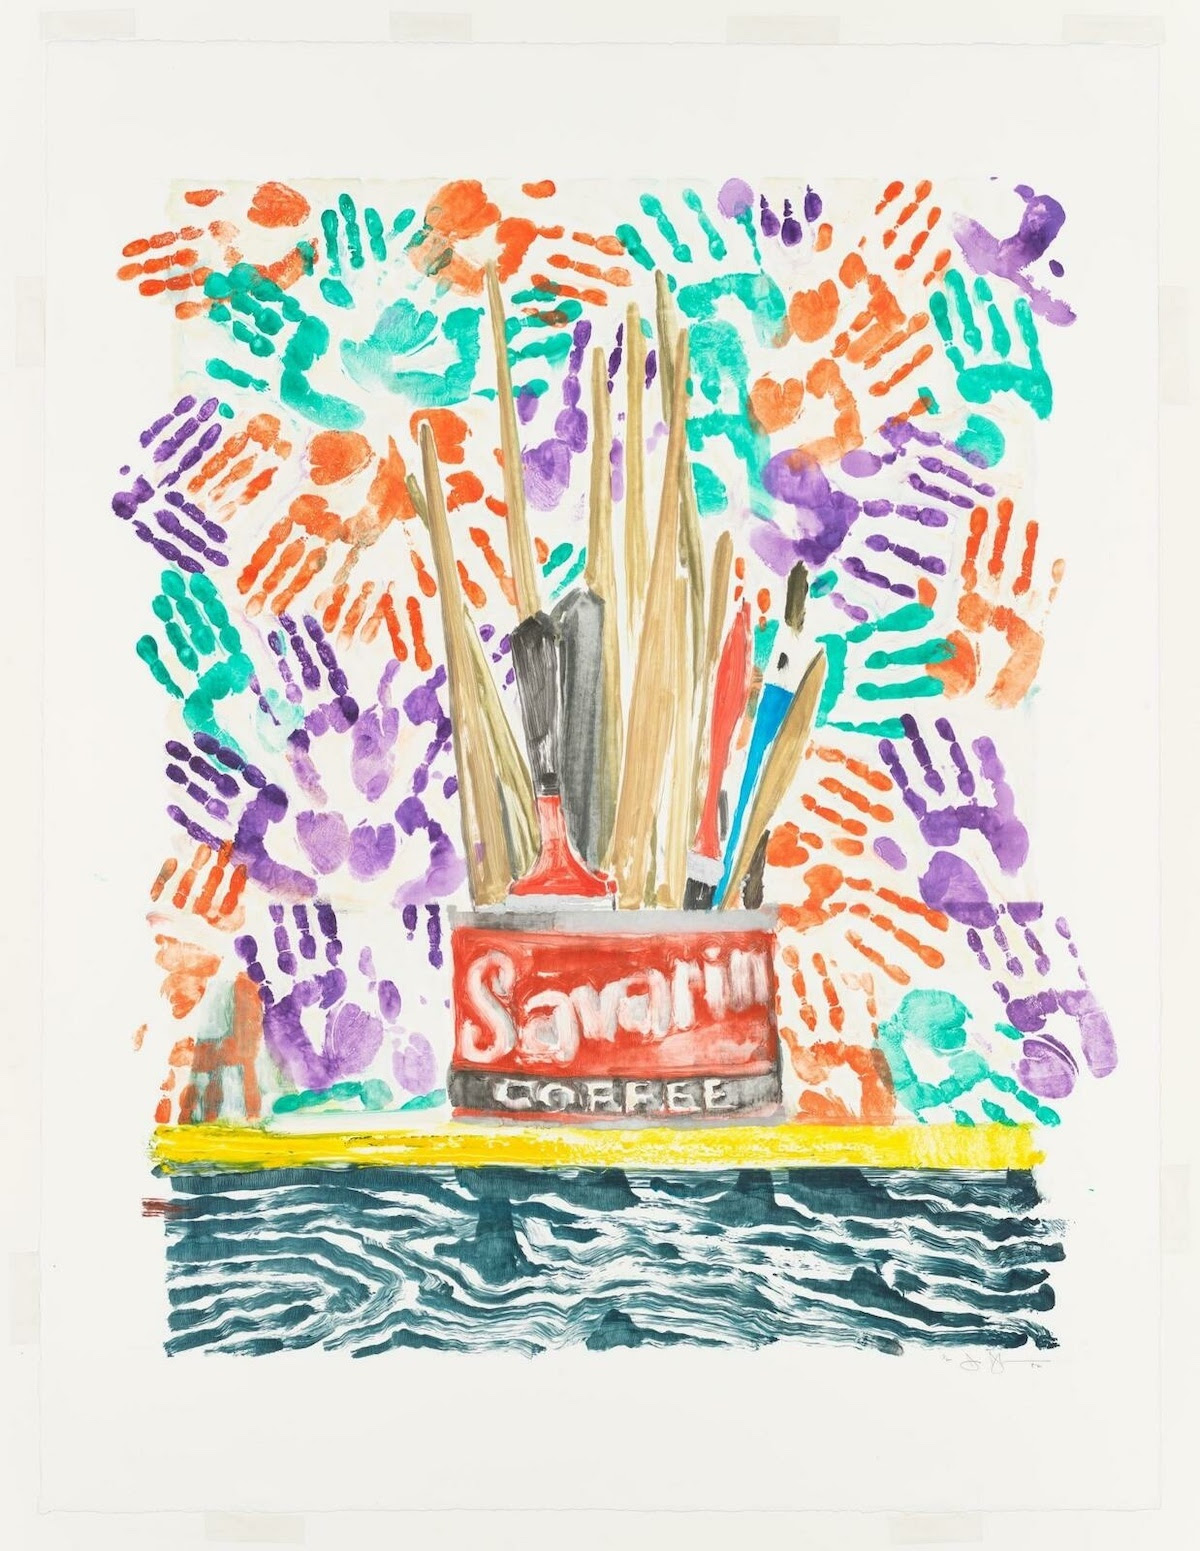 Jasper Johns, Savarin, 1982. Lithograph and monotype: sheet, 50 × 38 in. (127 × 96.5 cm); image, 40 1/4 × 33 1/4 in. (102.2 × 84.5 cm). Whitney Museum of American Art, New York; gift of The American Contemporary Art Foundation, Inc., Leonard A. Lauder, President 2002.228. © Jasper Johns / VAGA at Artists Rights Society (ARS), New York